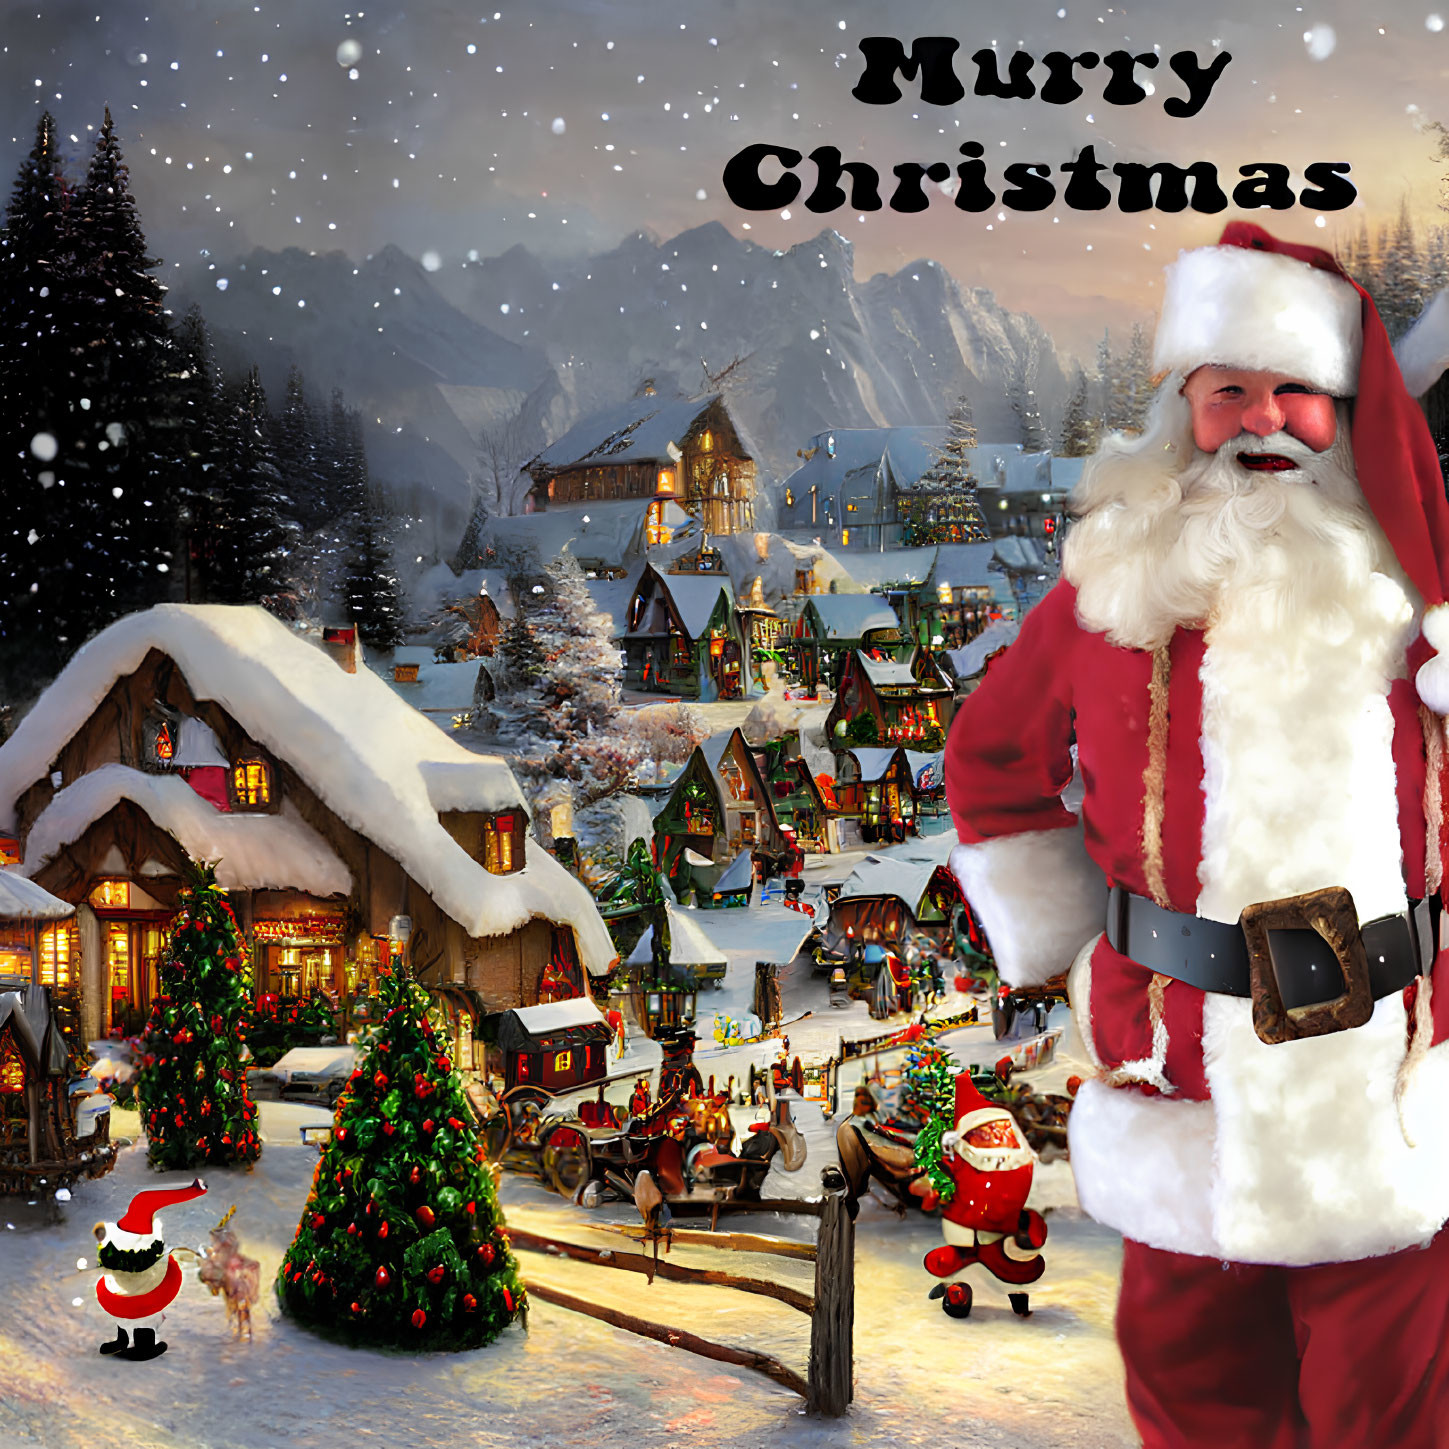 Festive Santa Claus with snowy village and Christmas tree backdrop.